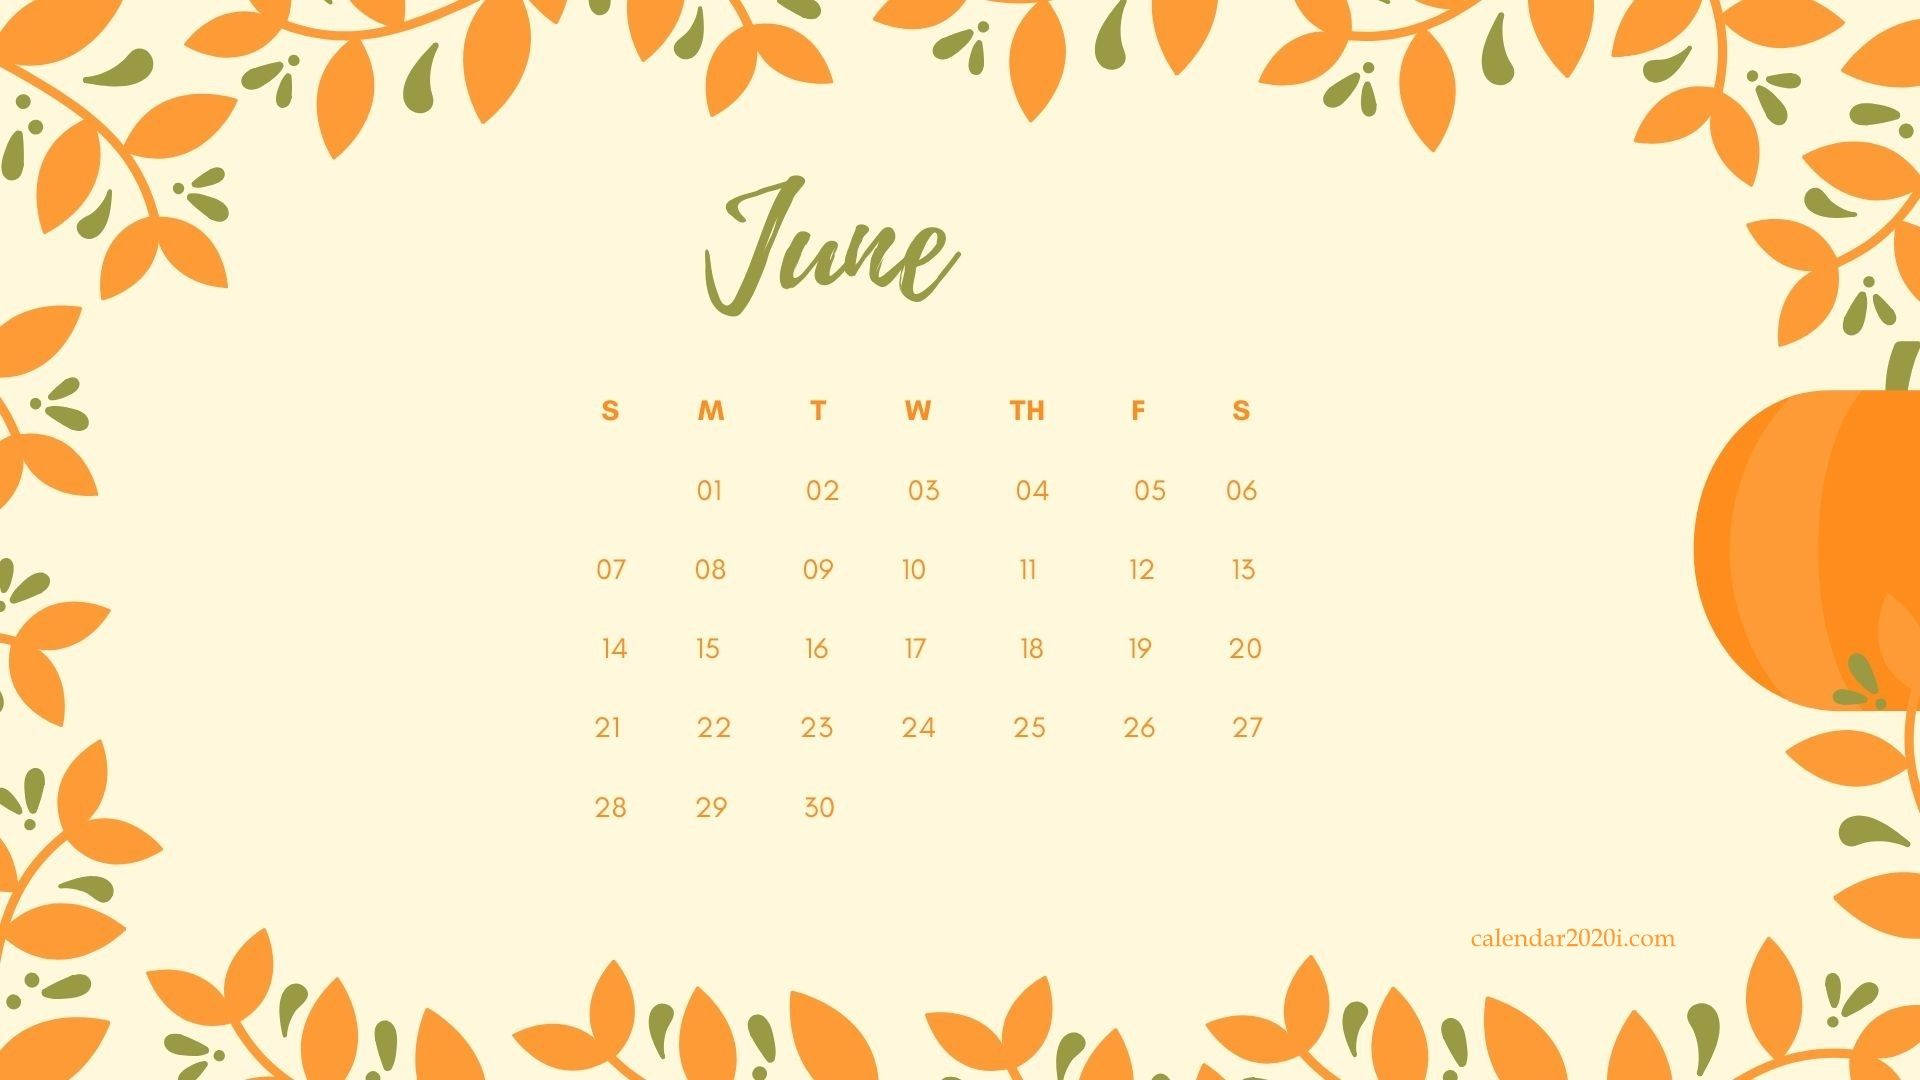 Get organized for June with this stylish calendar! Wallpaper